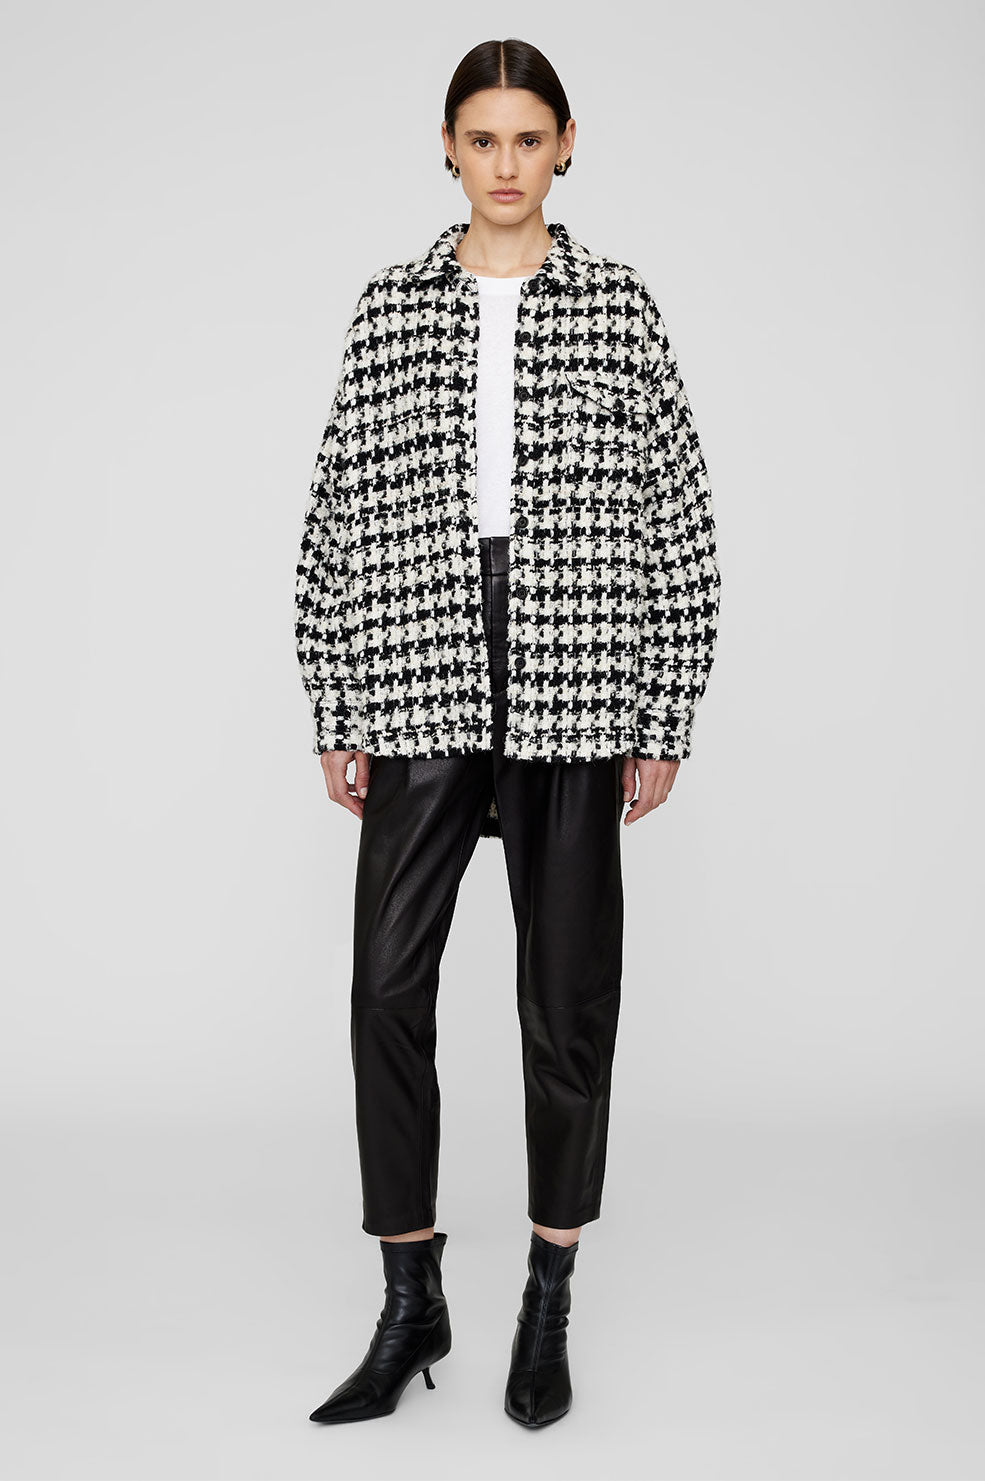 ANINE BING Sloan Jacket - Black And White - On Model Front